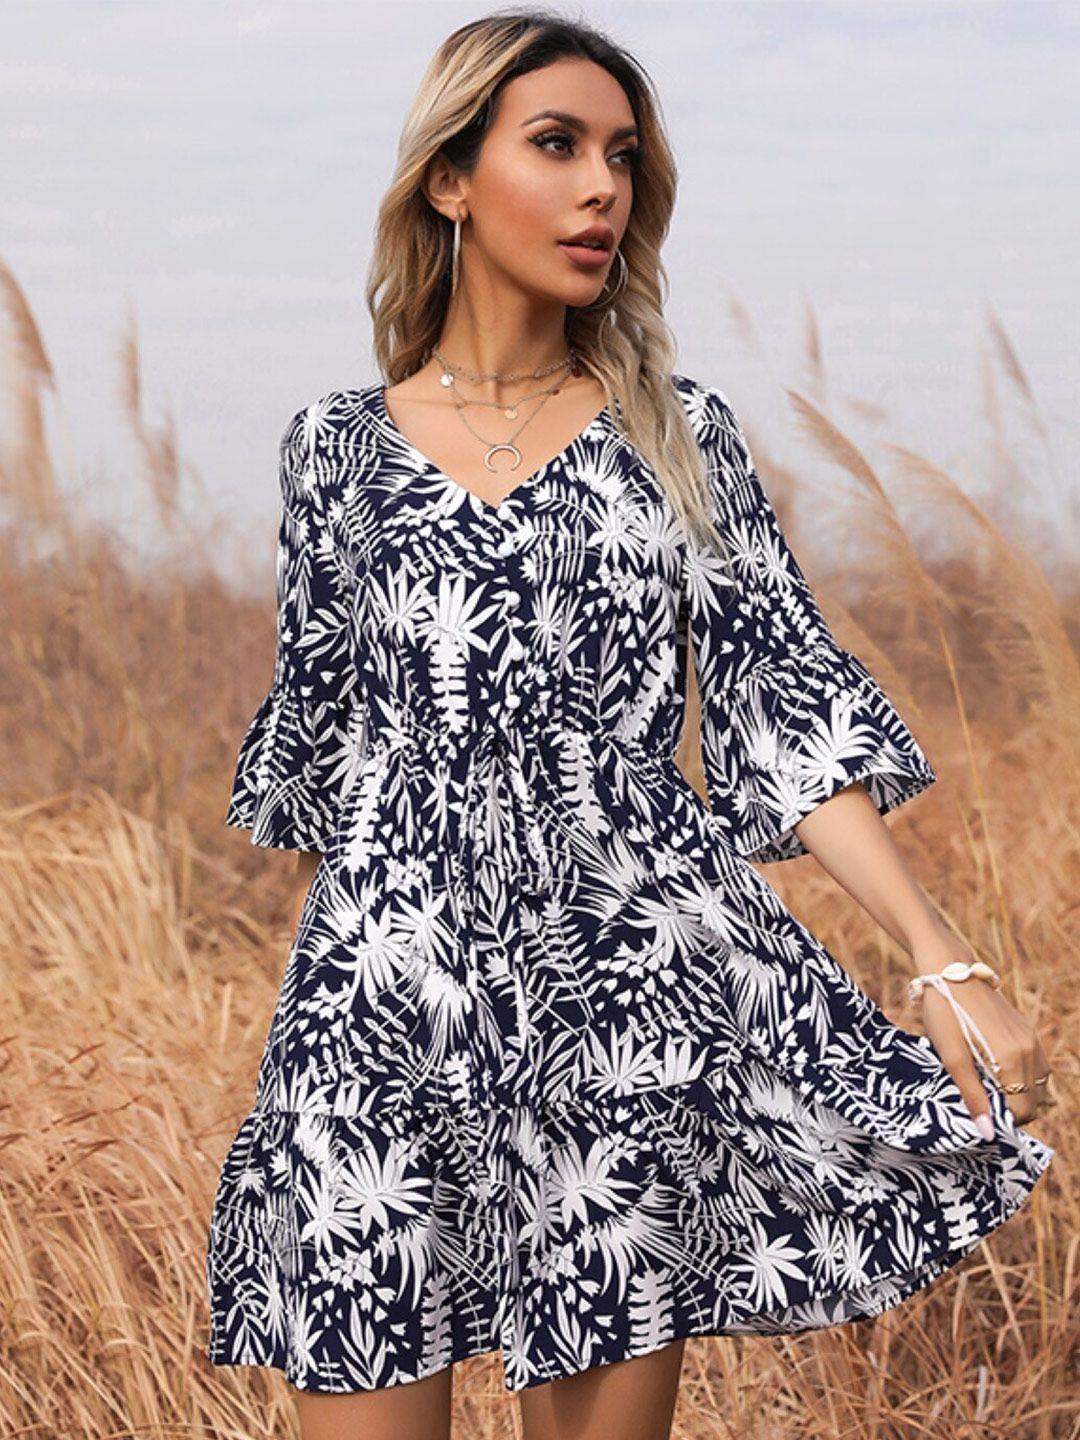 stylecast navy blue floral printed v-neck bell sleeve gathered detailed fit & flare dress